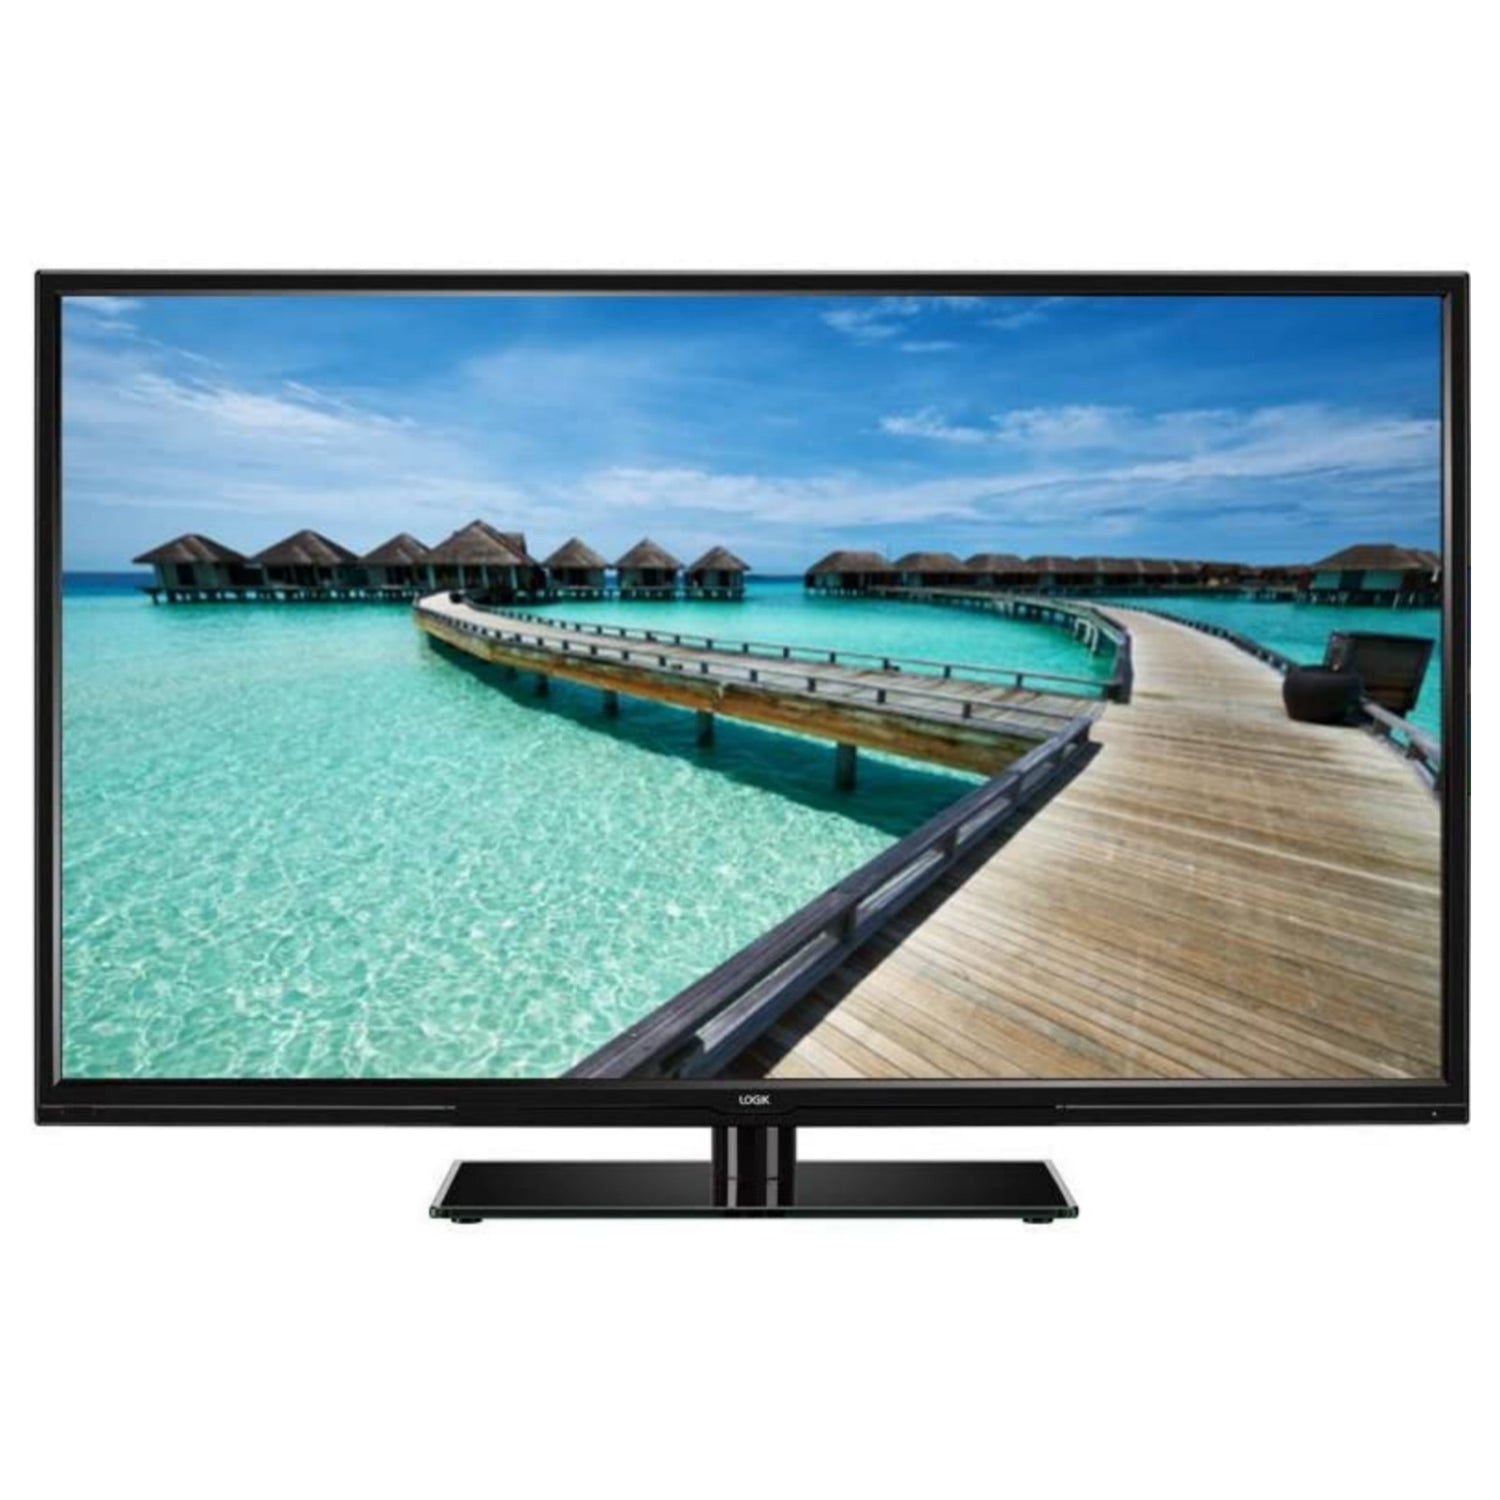 Logik Foreign Used televisions